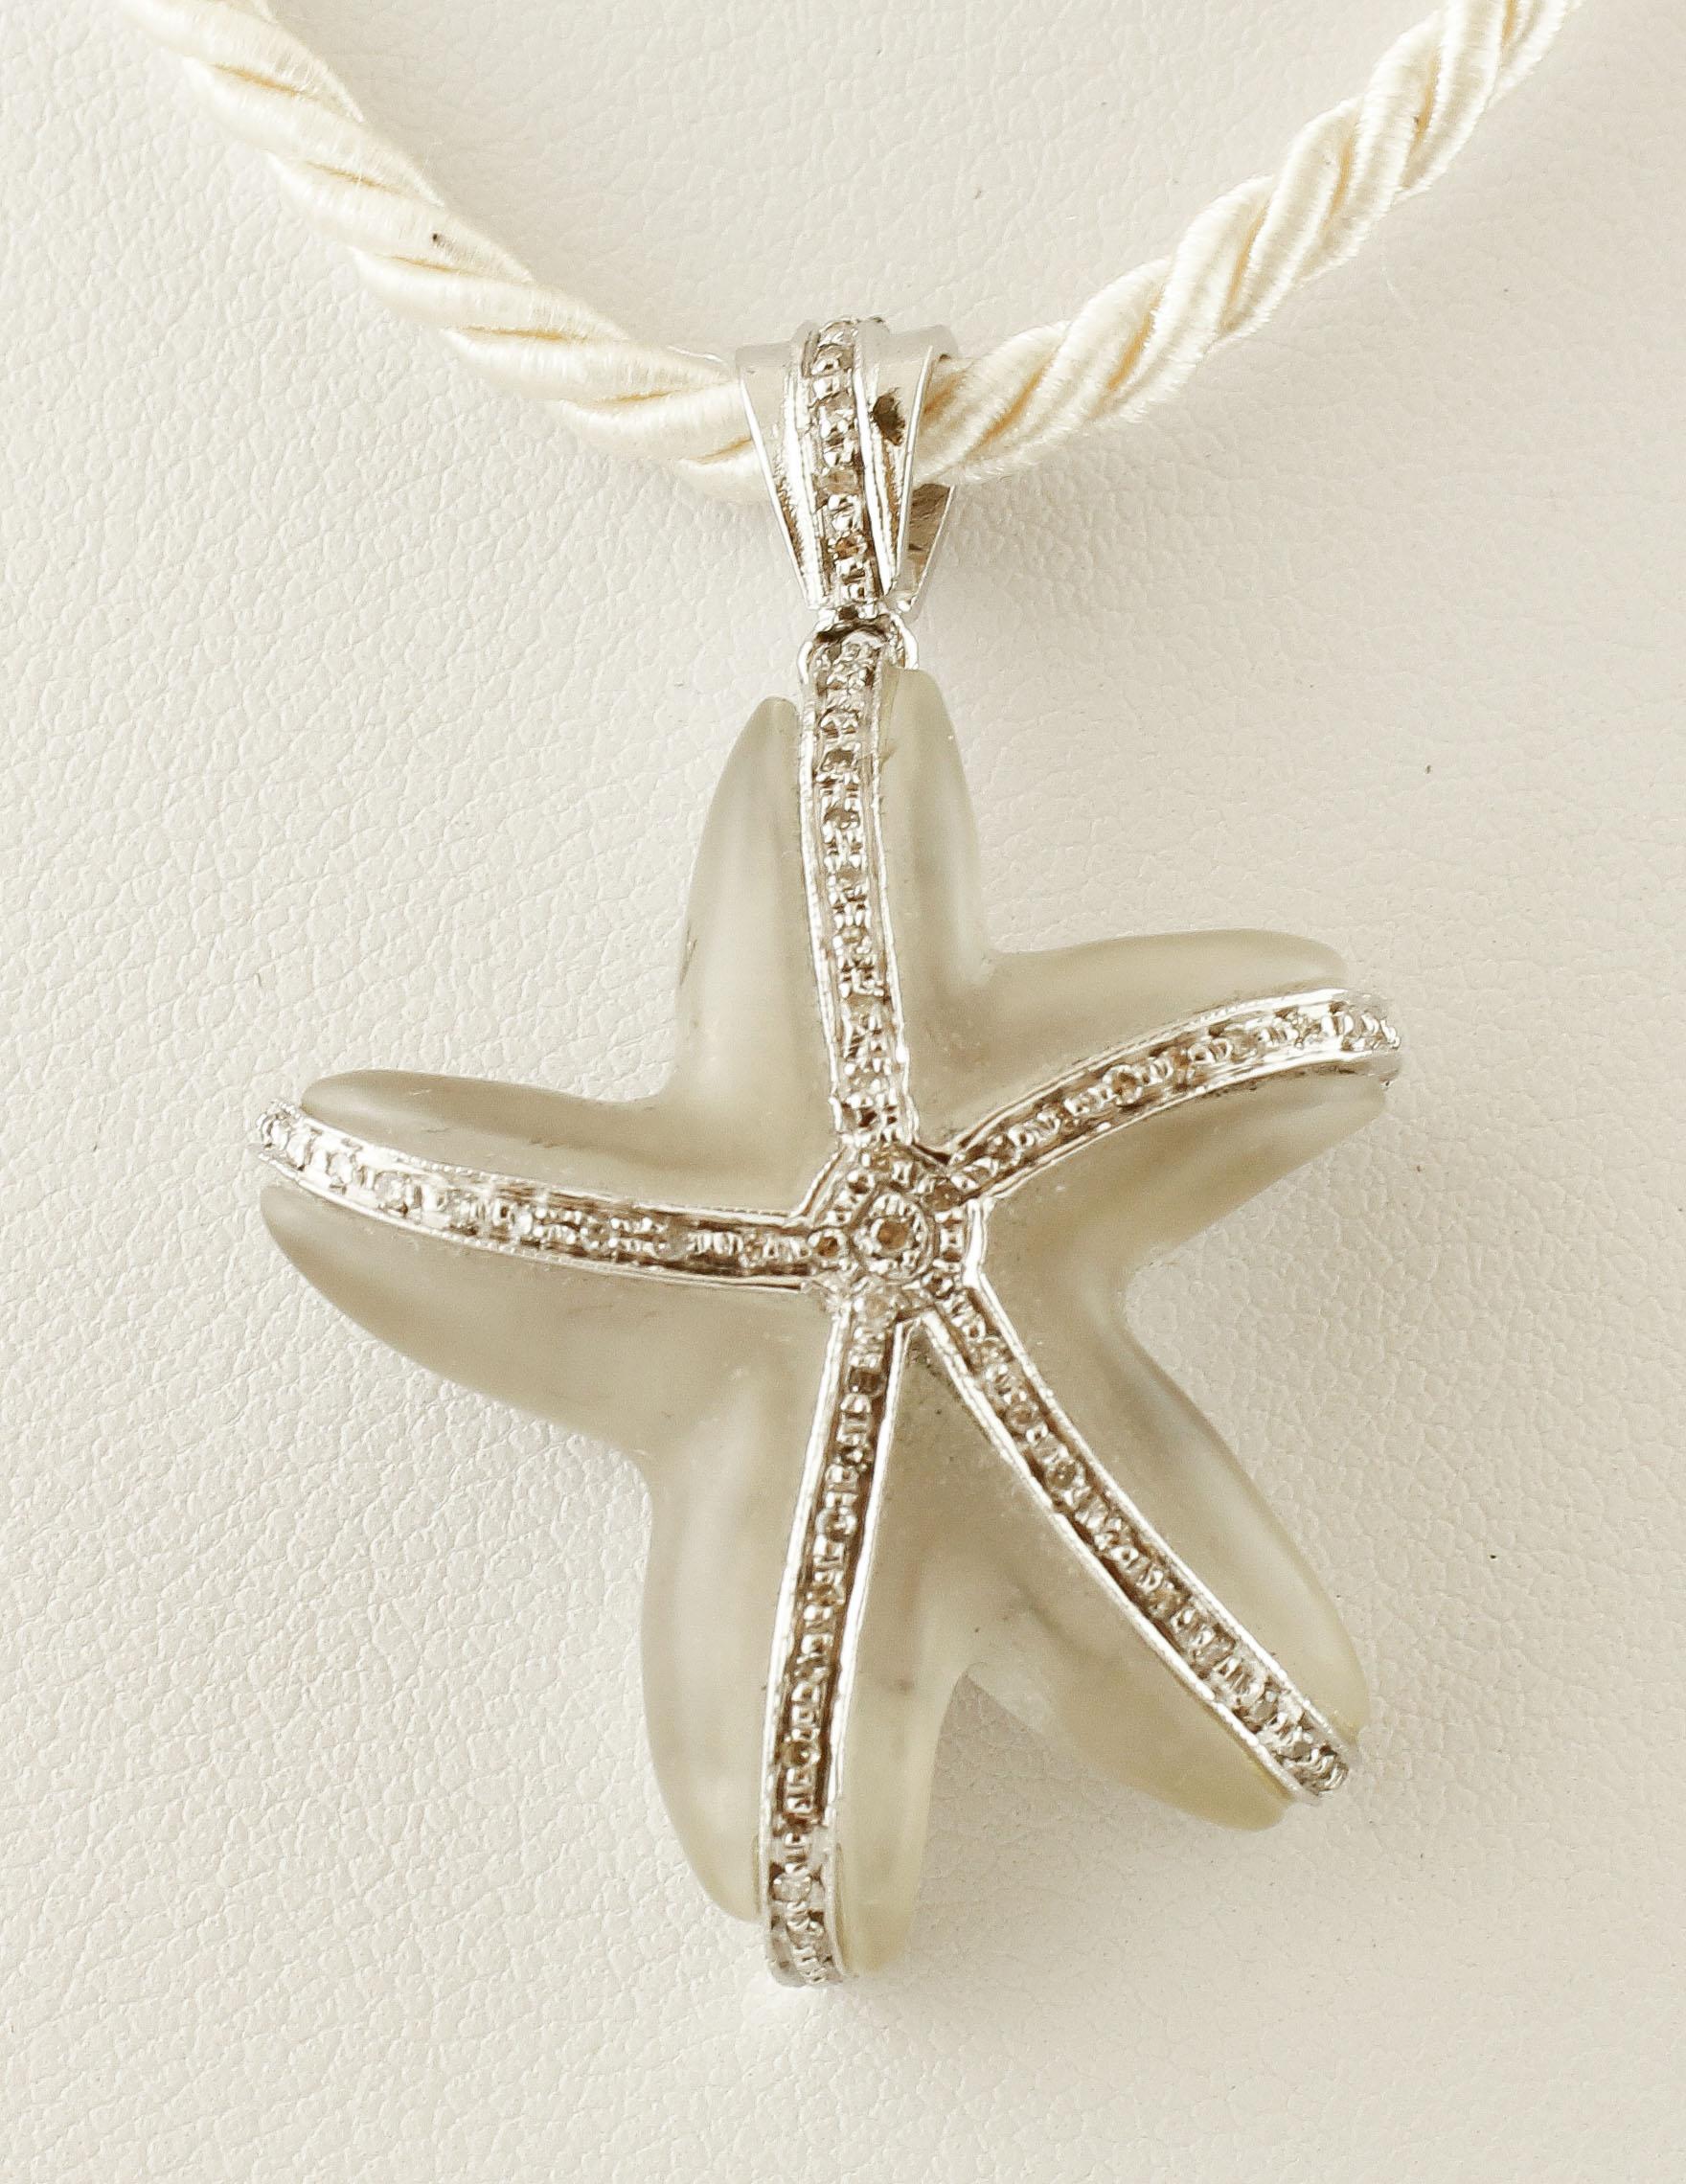 Charming and delightful,  starfish shaped rock crystal(3.90gr) pendant, embellished with stripes of shiny diamonds(0.23Kt) on it, all is mounted in 14Kt white gold. tot weight 11.7 gr
R.f. 514008

For any enquires, please contact the seller through